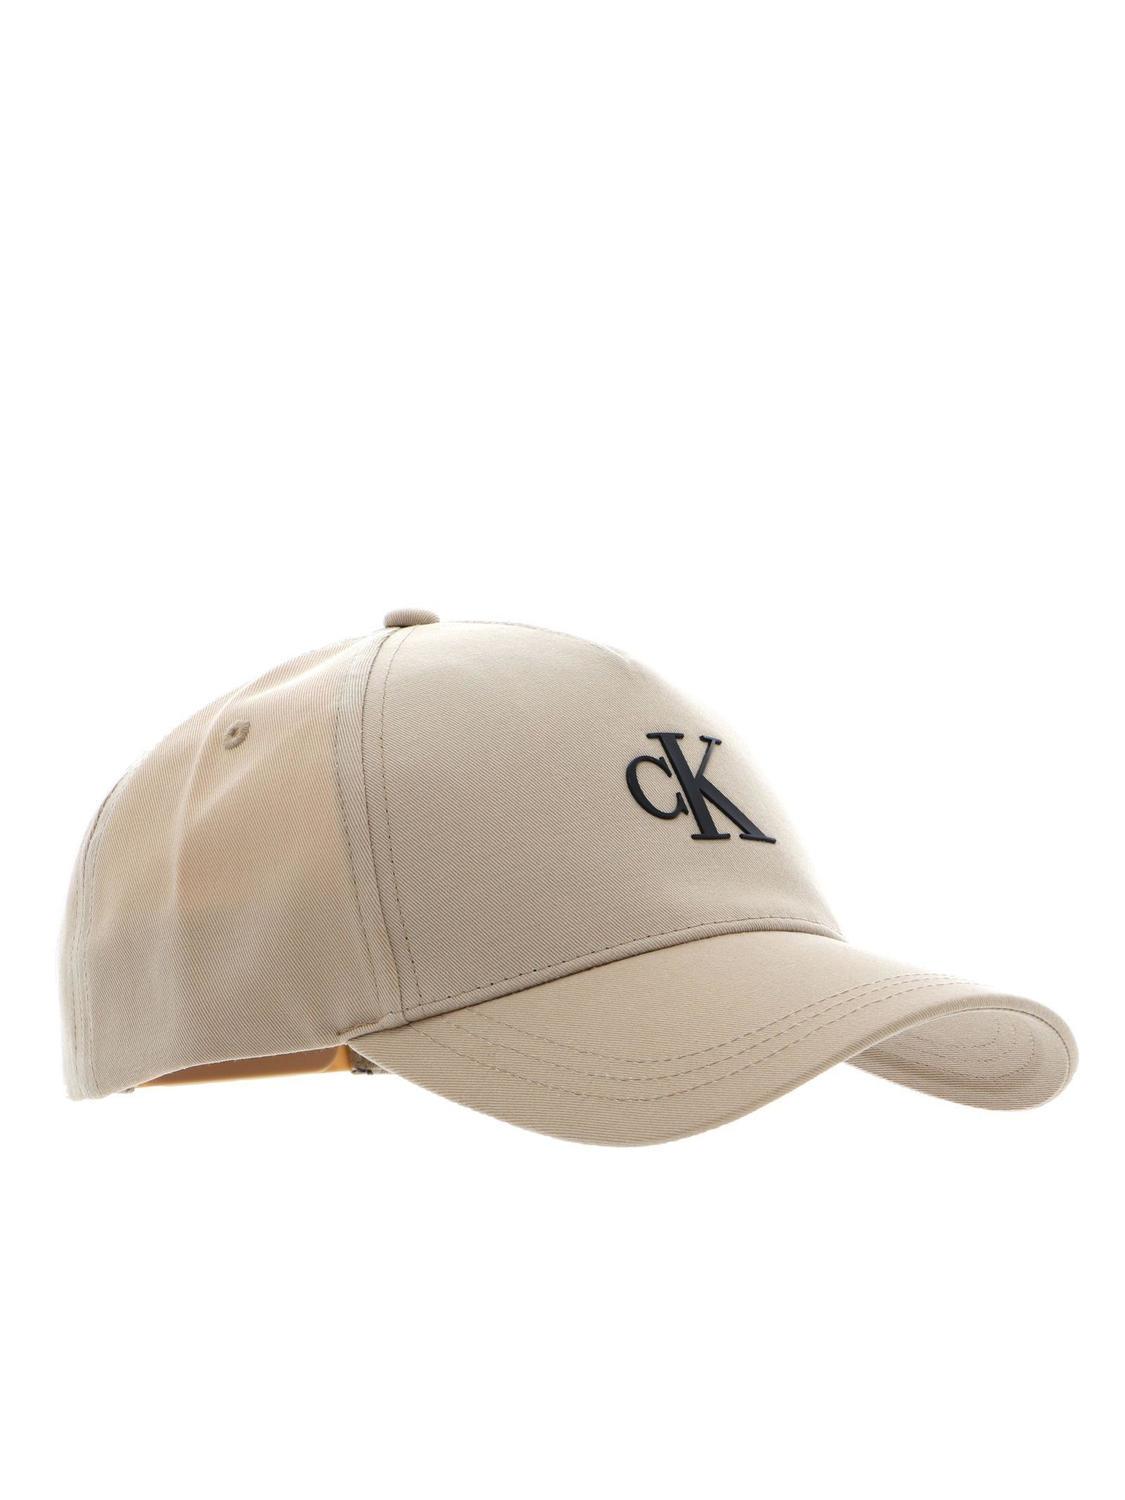 Klein Archive Prices! Calvin Buy - Ck Baseball Travertine Hat Jeans At Outlet